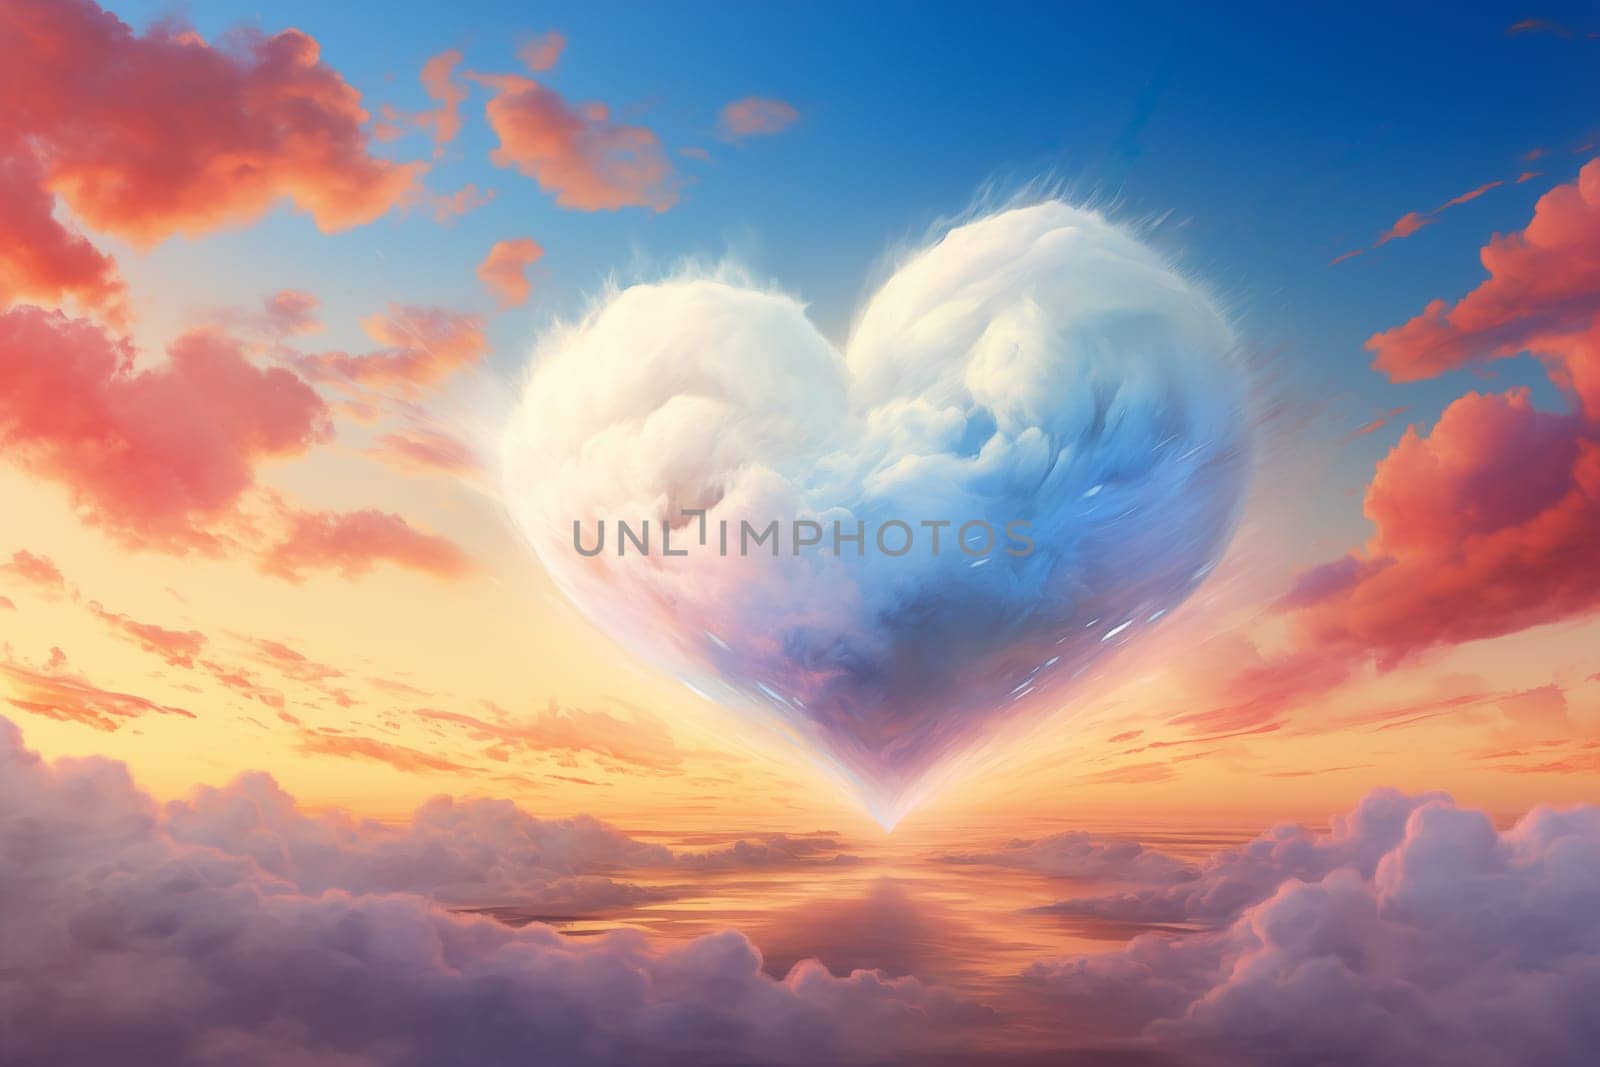 Heart-Shaped Cloud at Sunset Painting by dimol